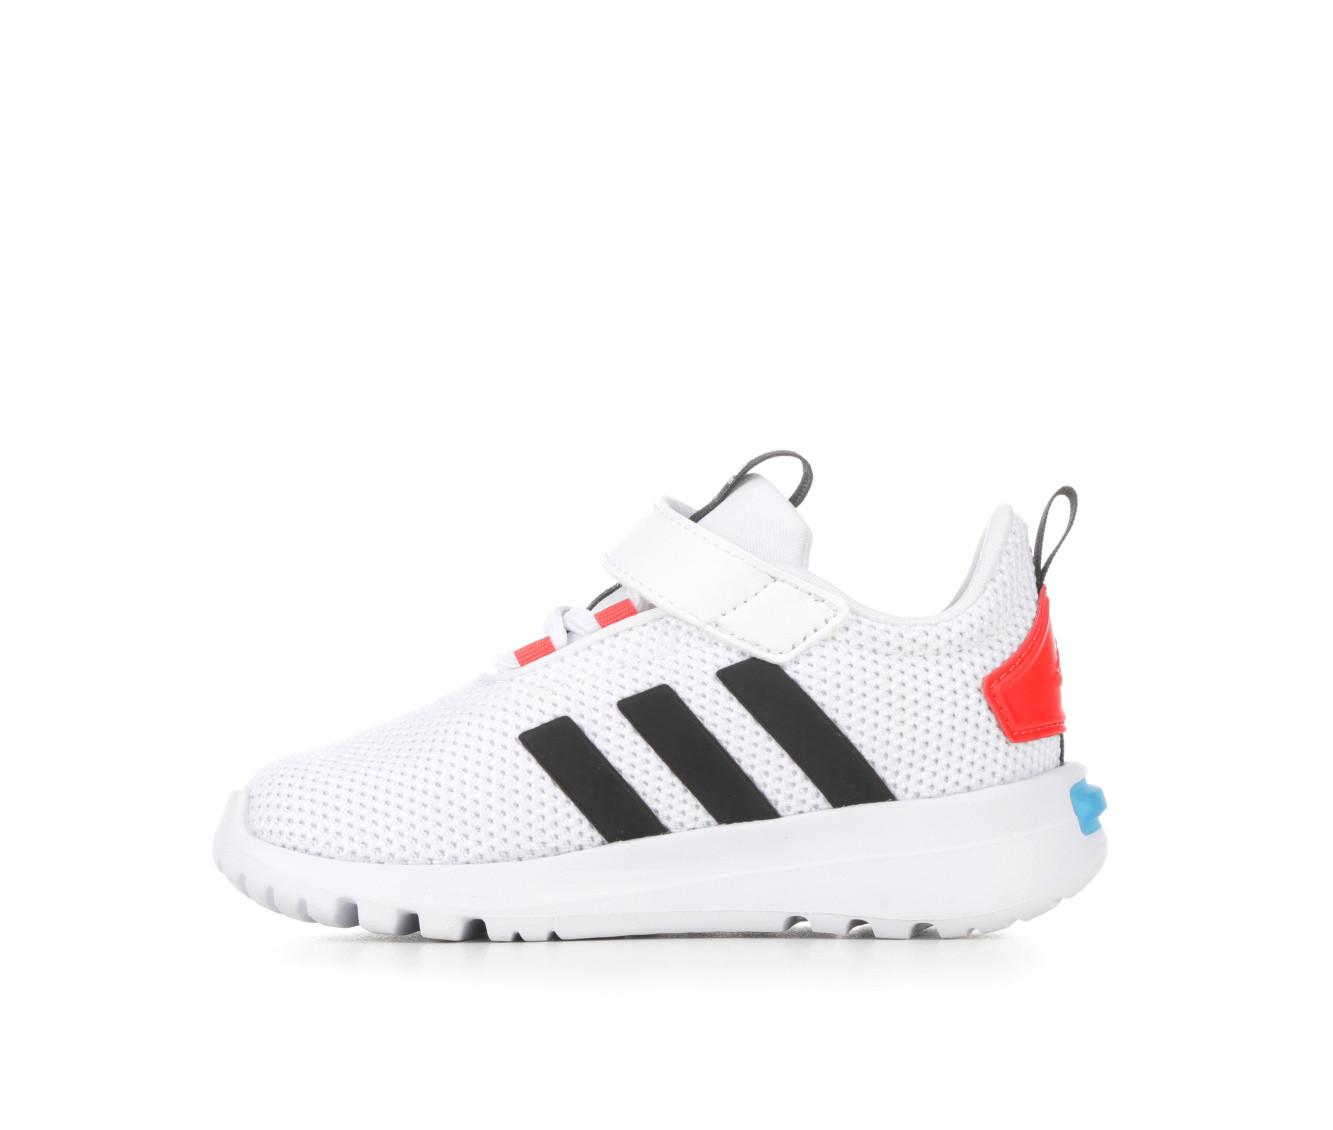 Boys' Adidas Infant & Toddler Racer TR23 Running Shoes